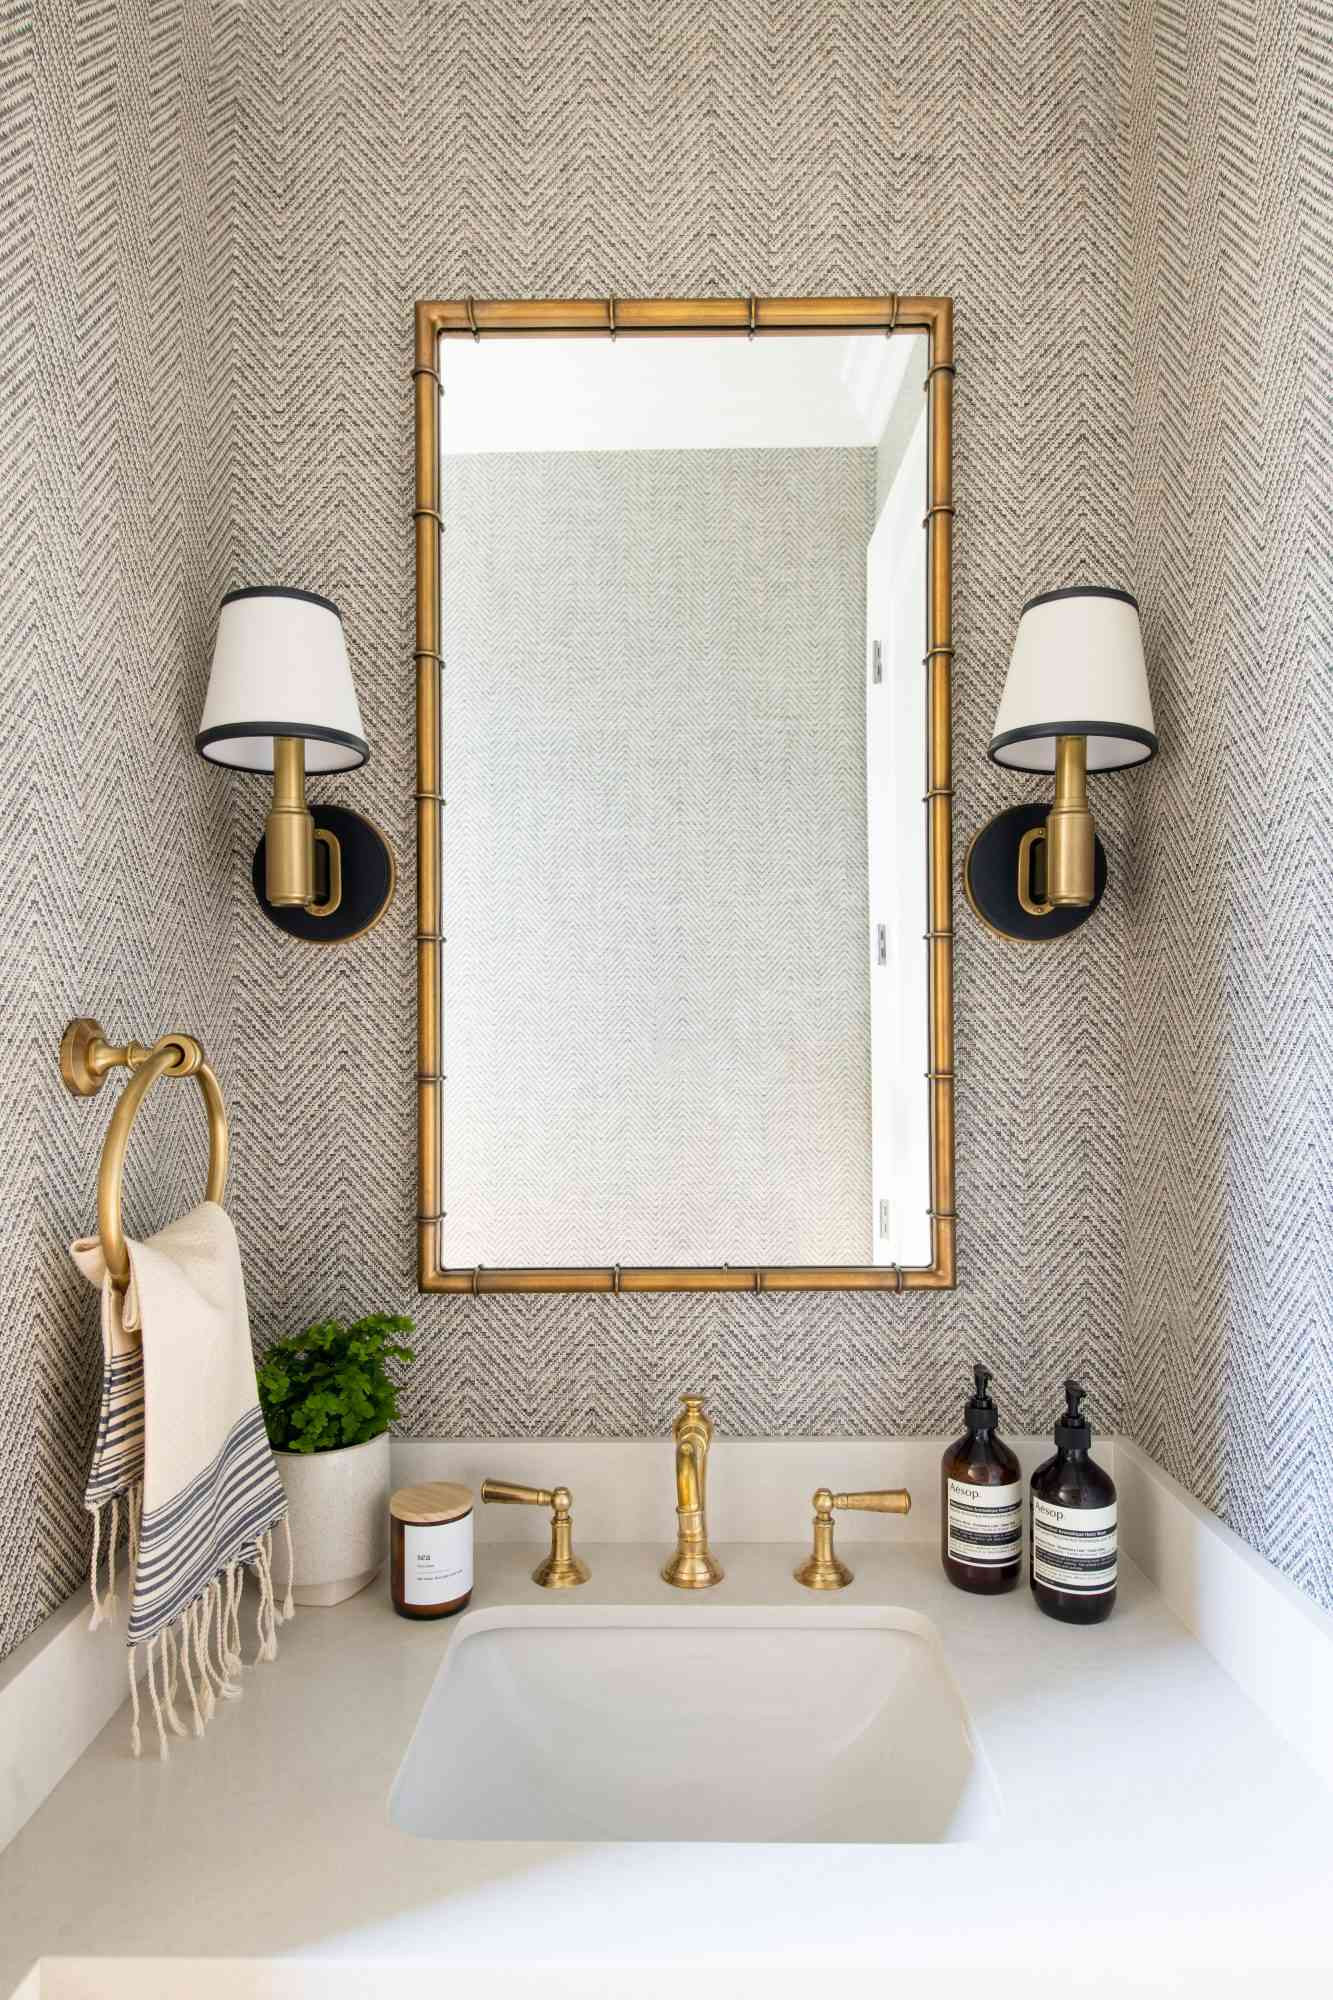 Bathroom Wallpaper Ideas That Will Transform Your Space